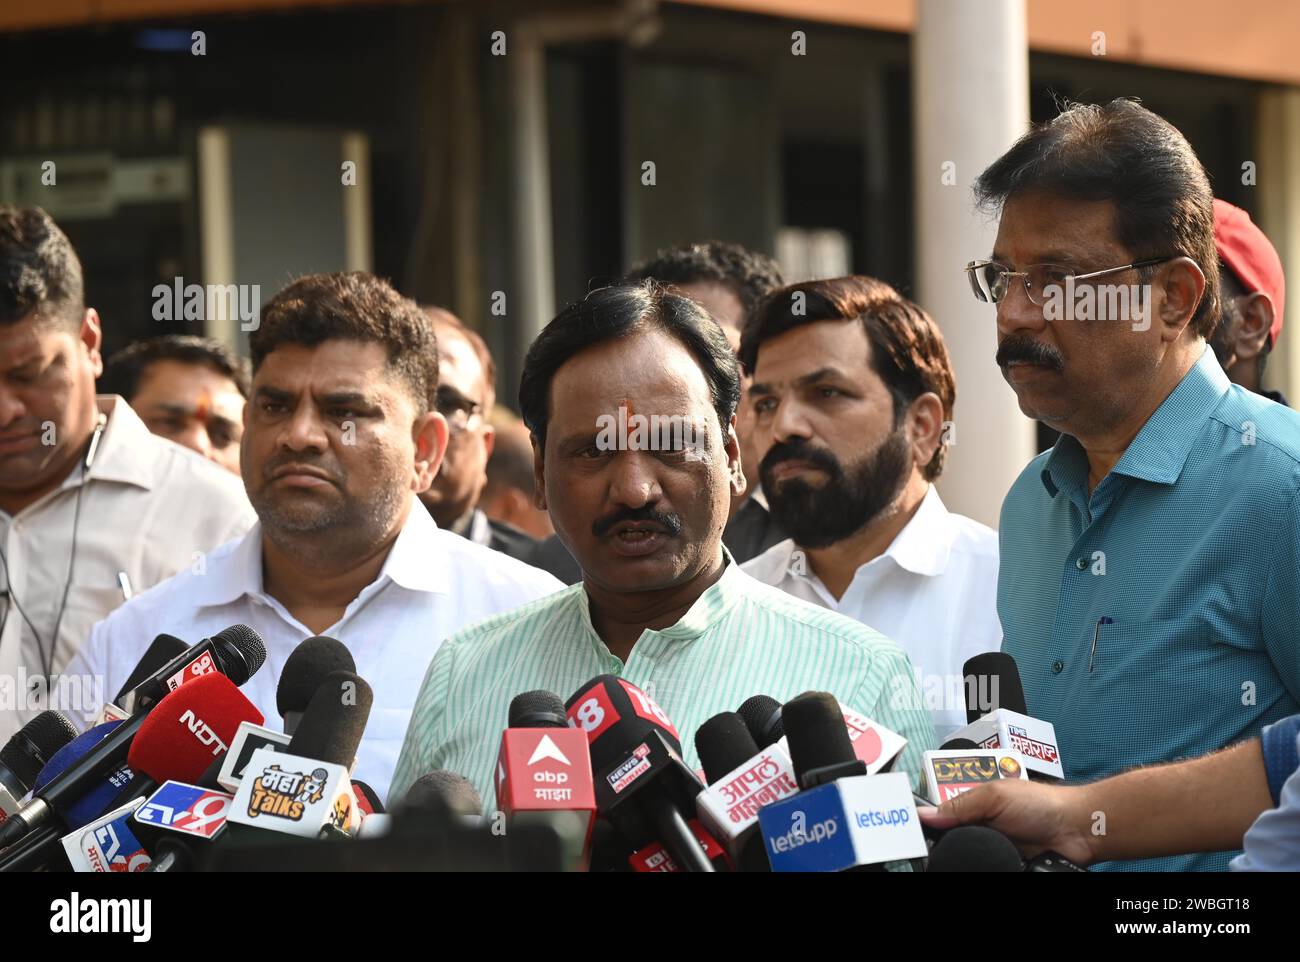 MUMBAI, INDIA - JANUARY 10: Shiv Sena (UBT) MLAs Sunil Prabhu, and Amdadas Danve, addressing the media, at Vidhan Bhavan on January 10, 2024 in Mumbai, India. The Maharashtra Legislative Assembly Speaker Rahul Narwekar today held that Eknath Shinde led faction was the real Shiv Sena when the rival faction emerged within the party on June 22, 2022. He has refused to disqualify any member from both the factions, led by Shinde and Uddhav Thackeray. Both the factions had filed 34 petitions against each other before the speaker in 2022, seeking the disqualification of 54 MLAs in total. (Photo by B Stock Photo